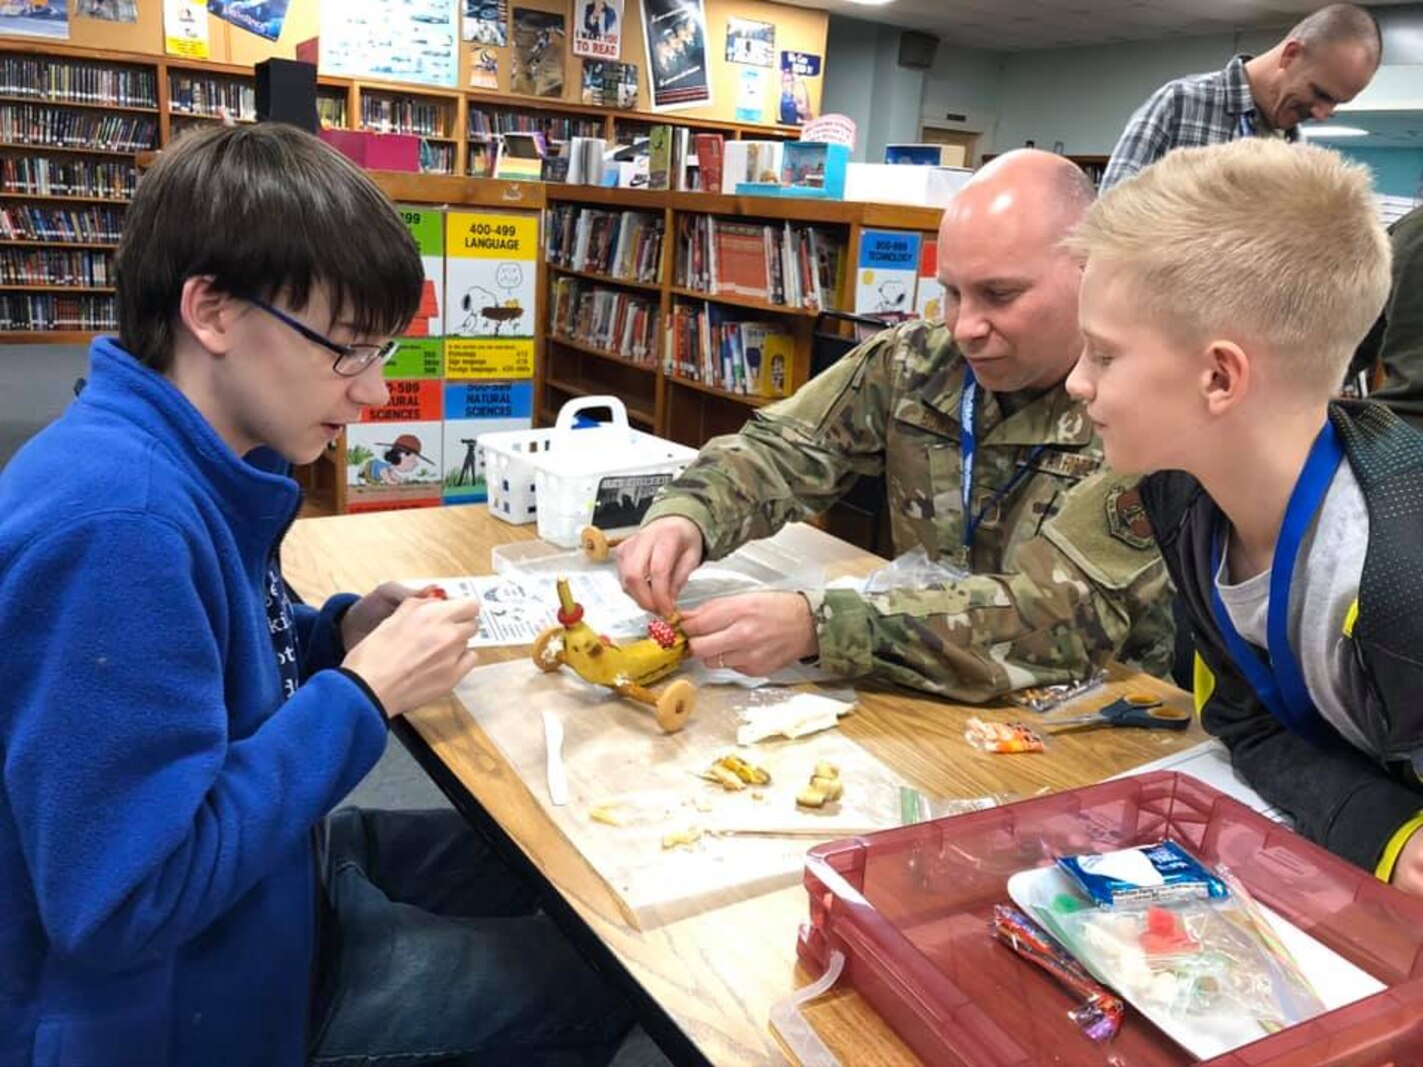 STARBASE Martinsburg offers students "hands-on, minds-on" STEM-based activities.